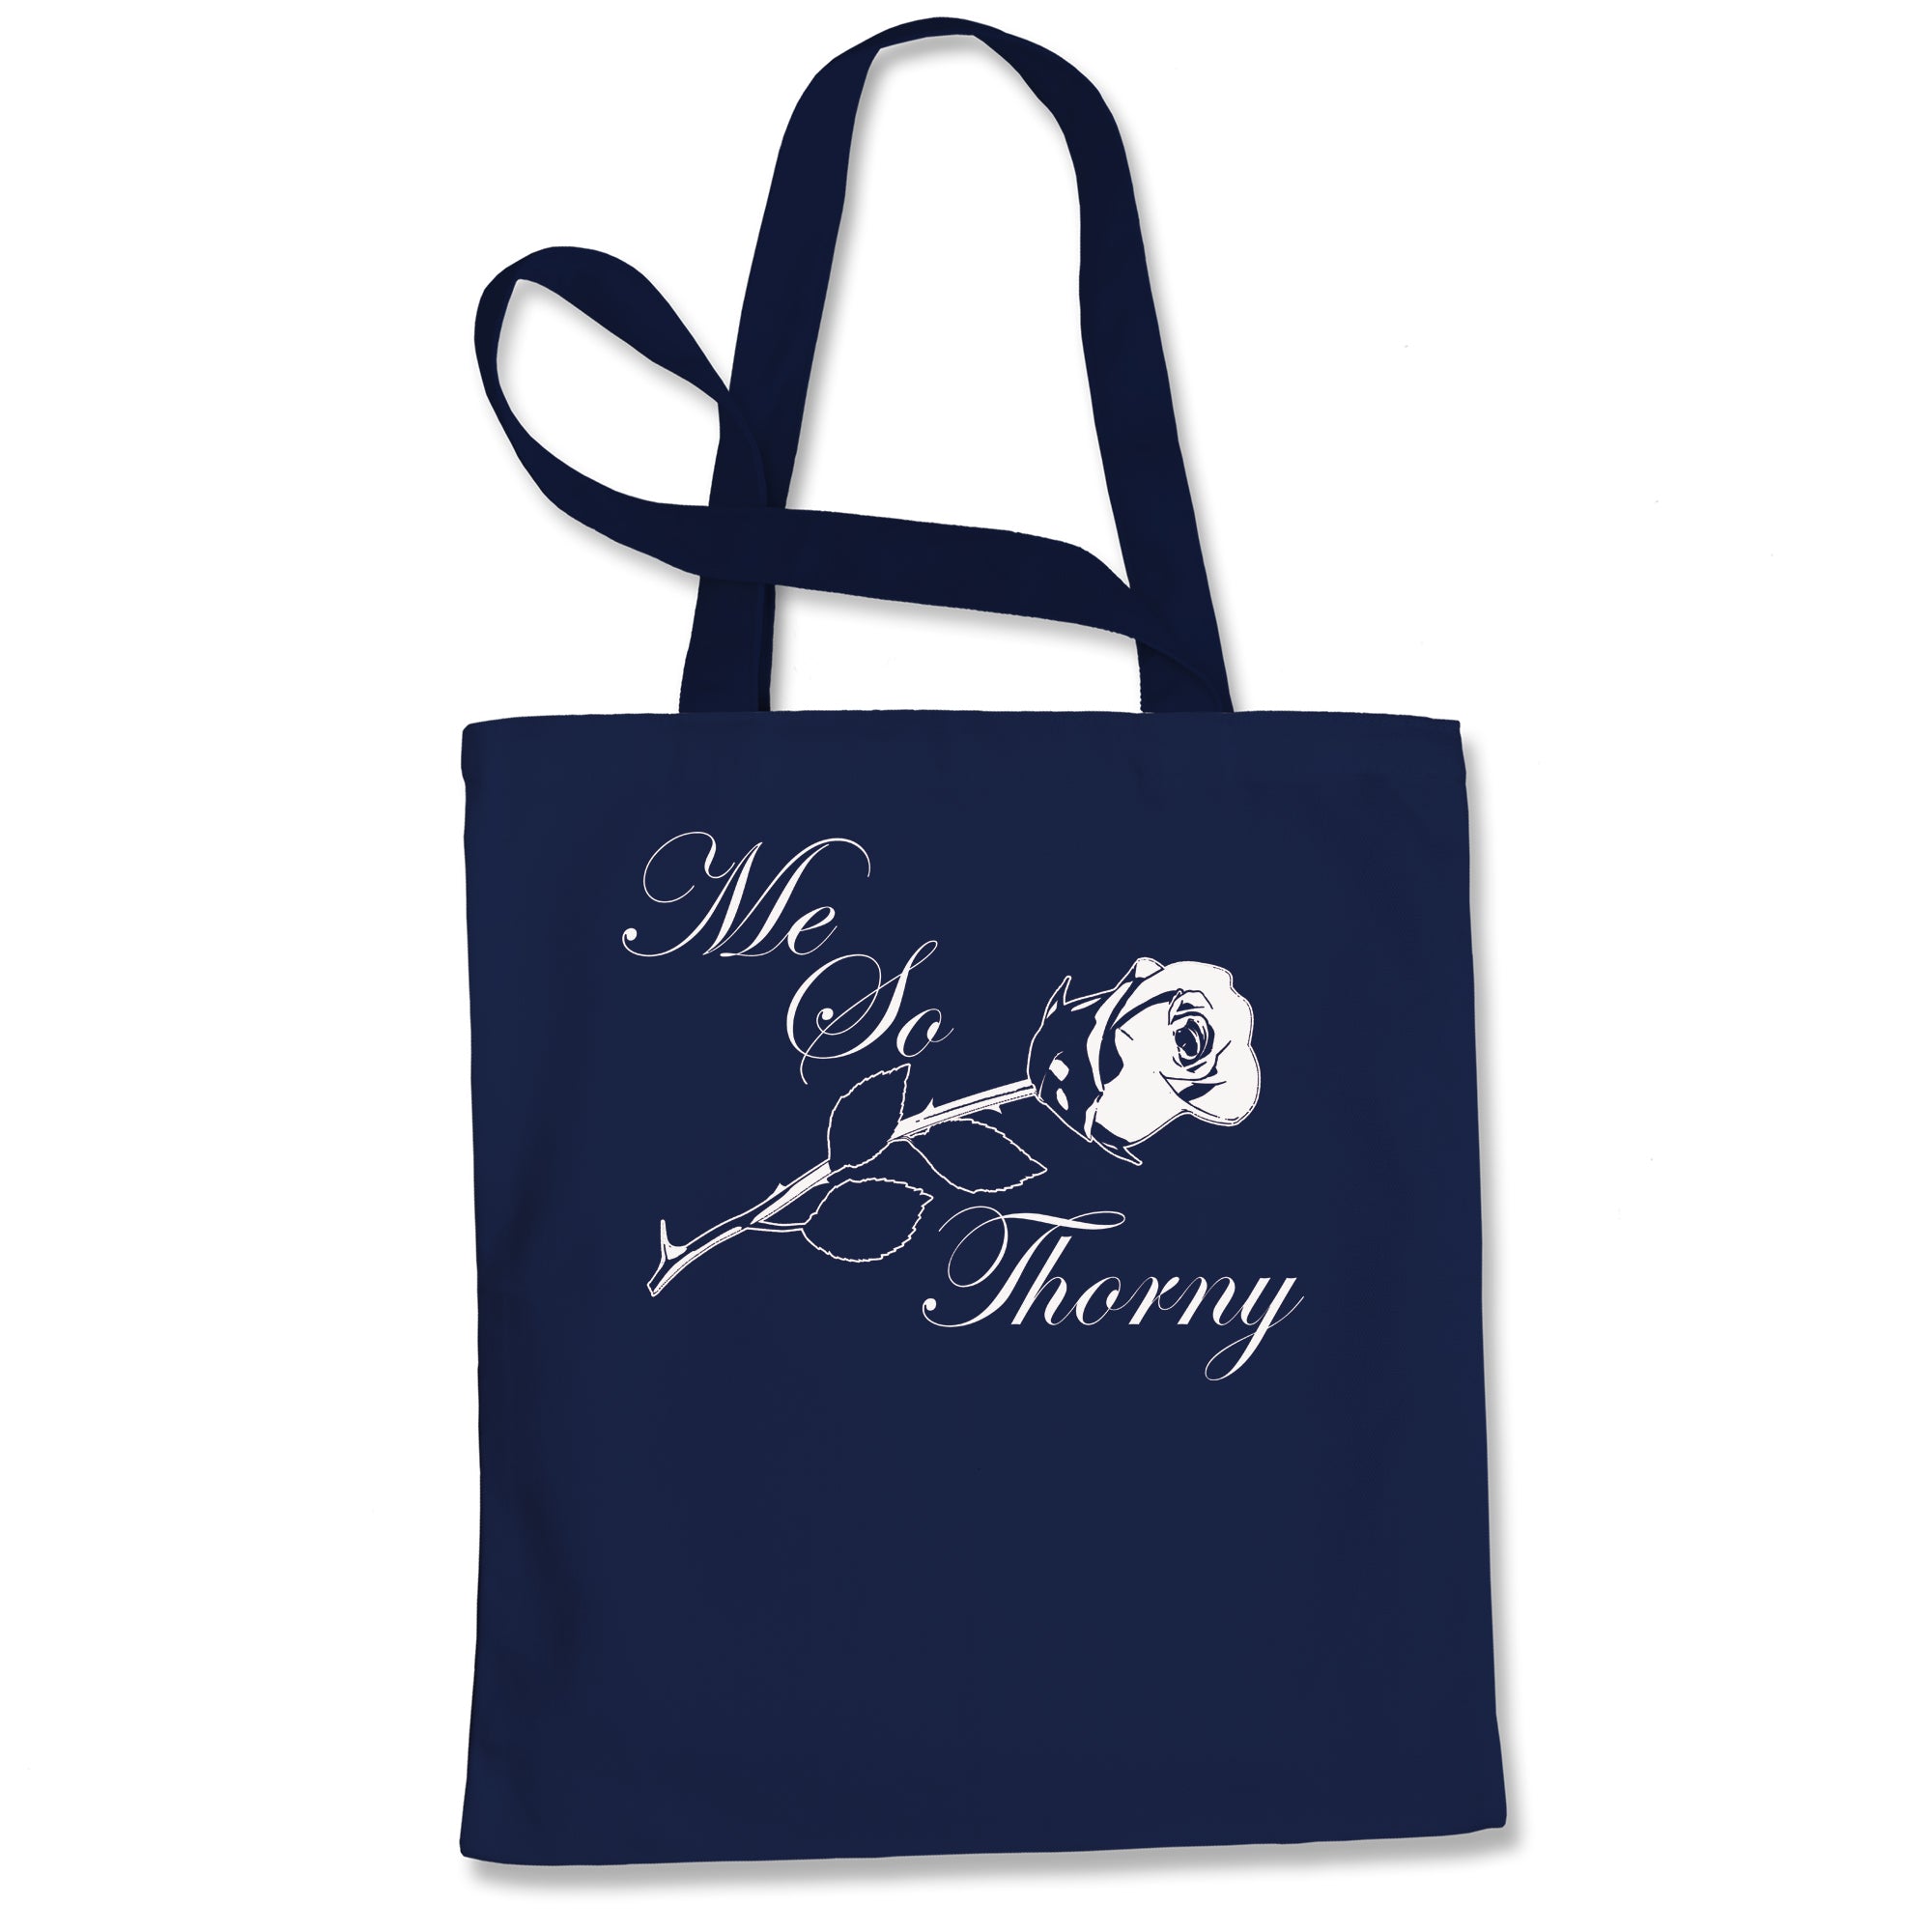 Me So Thorny Funny Romance and Valentine's Day Tote Bag